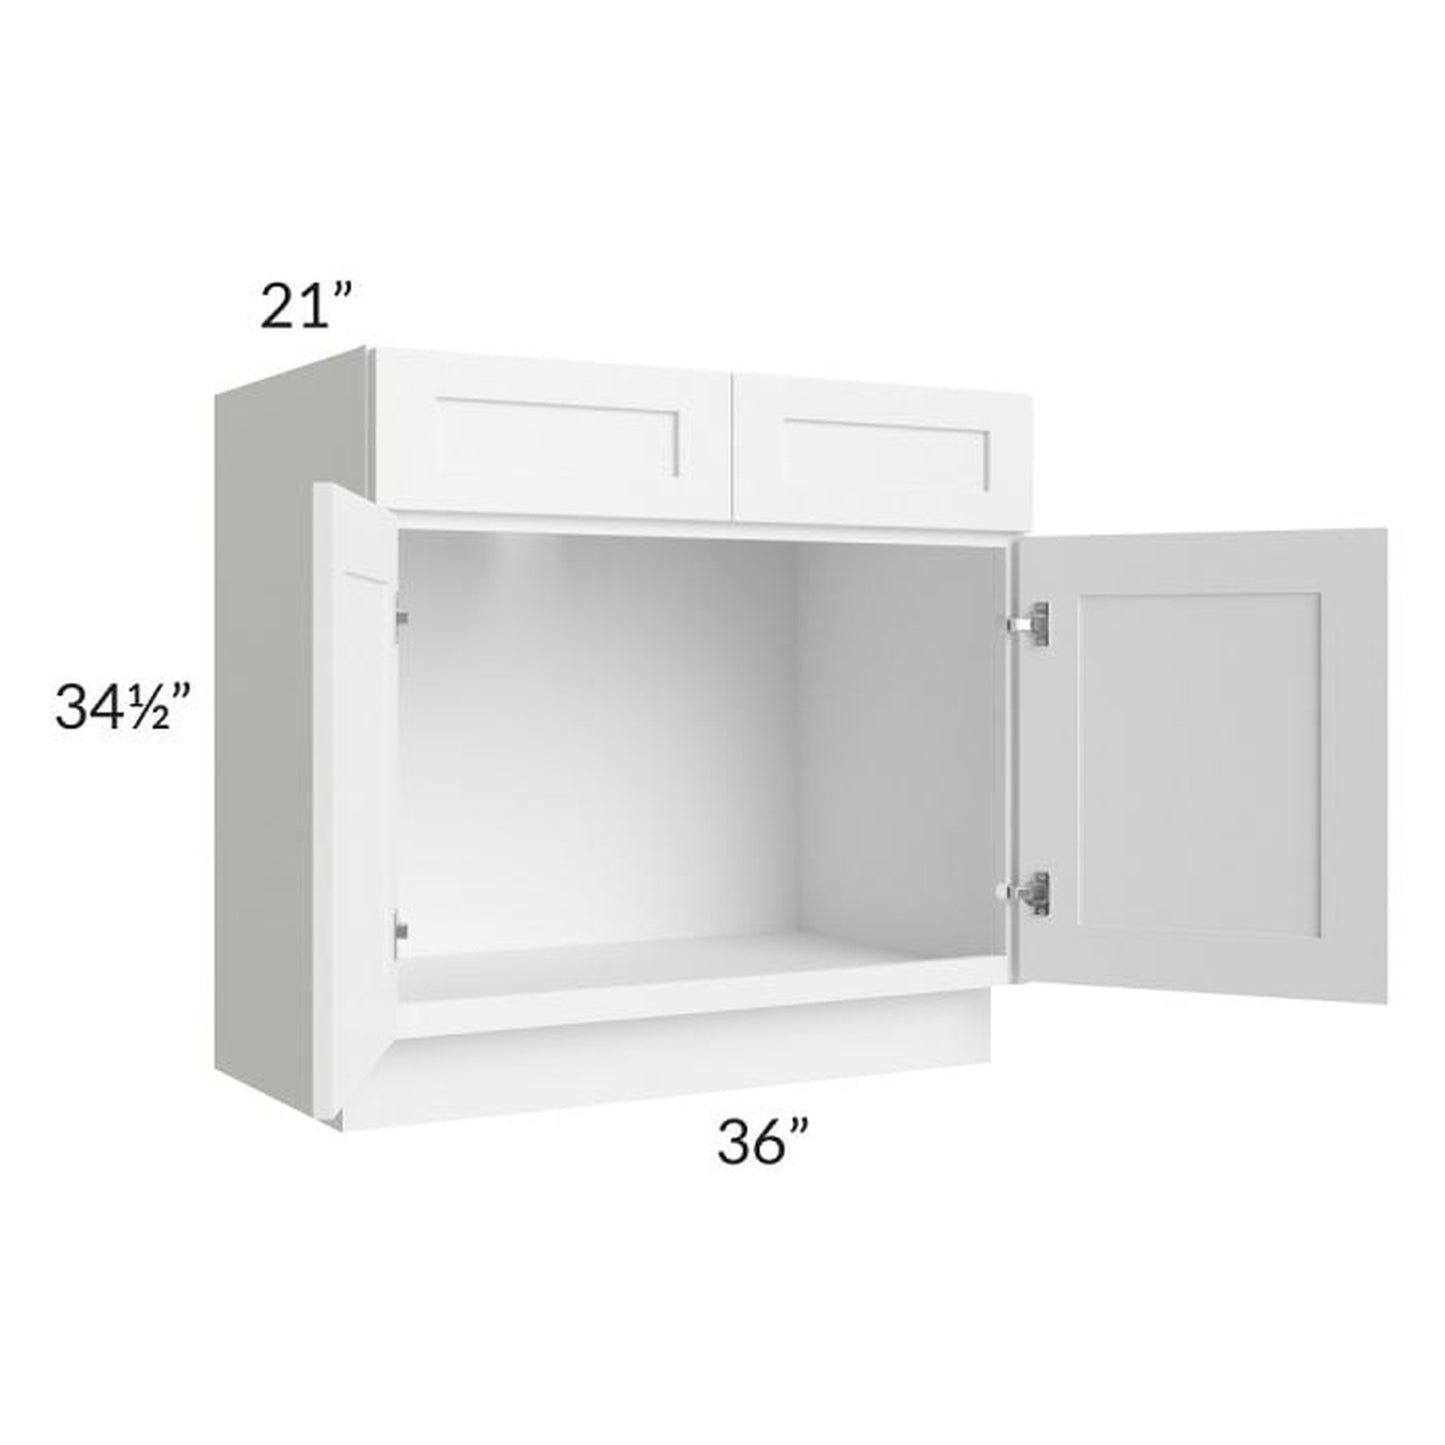 RTA Frosted White Shaker 36" Vanity Sink Base Cabinet